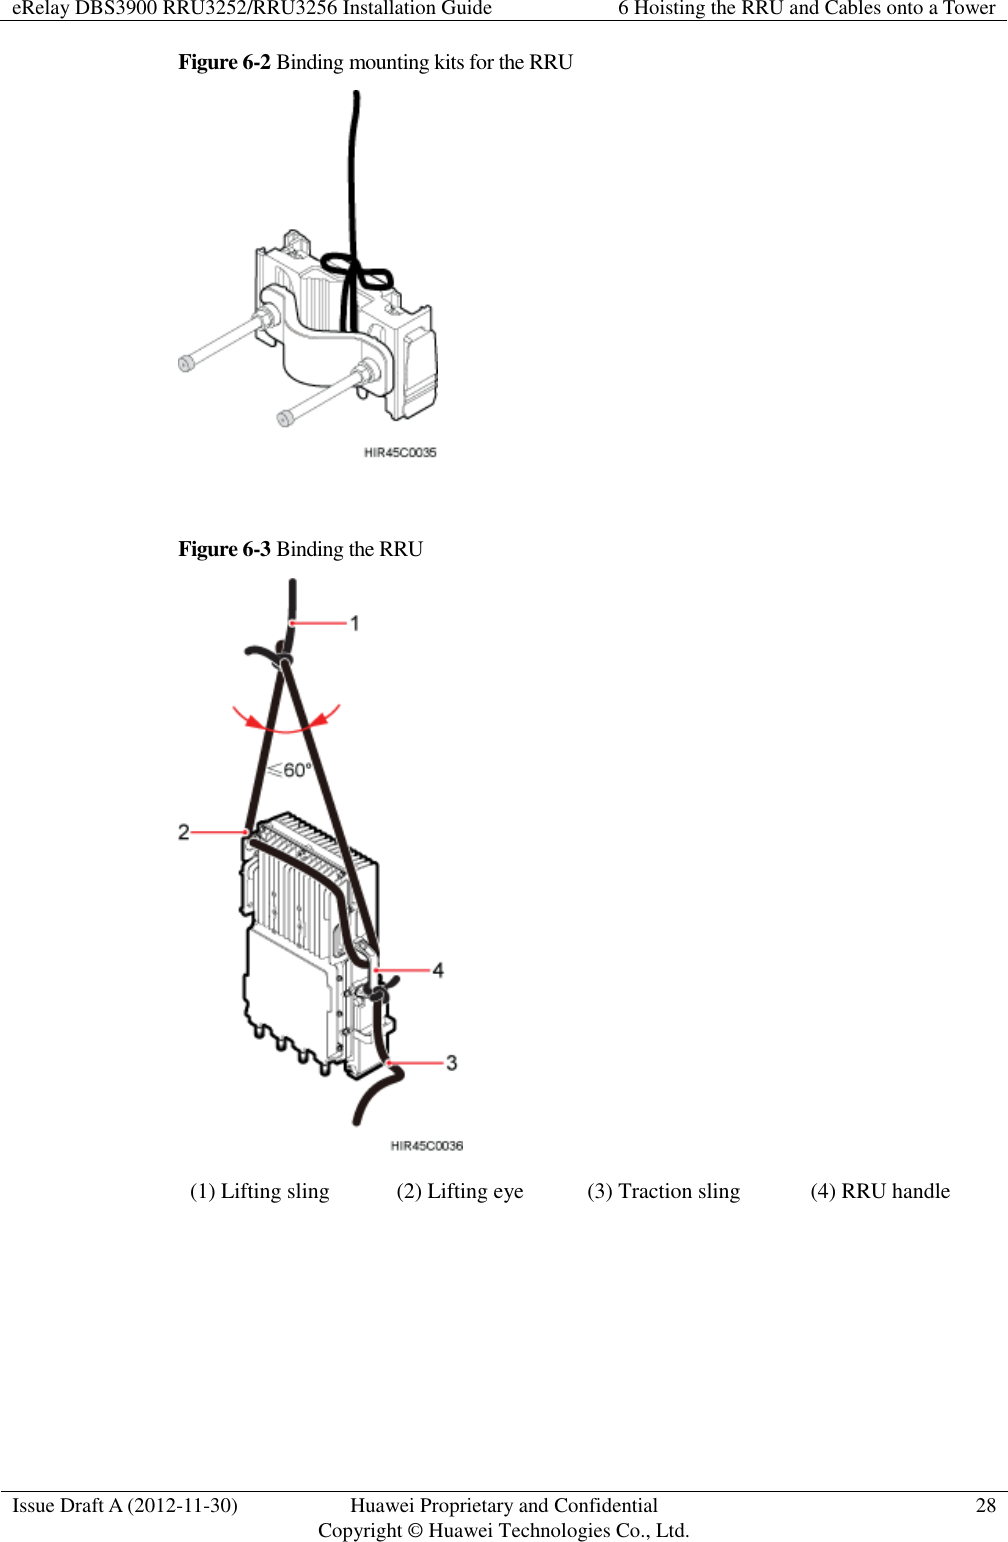 eRelay DBS3900 RRU3252/RRU3256 Installation Guide 6 Hoisting the RRU and Cables onto a Tower  Issue Draft A (2012-11-30) Huawei Proprietary and Confidential                                     Copyright © Huawei Technologies Co., Ltd. 28  Figure 6-2 Binding mounting kits for the RRU   Figure 6-3 Binding the RRU  (1) Lifting sling (2) Lifting eye (3) Traction sling (4) RRU handle   